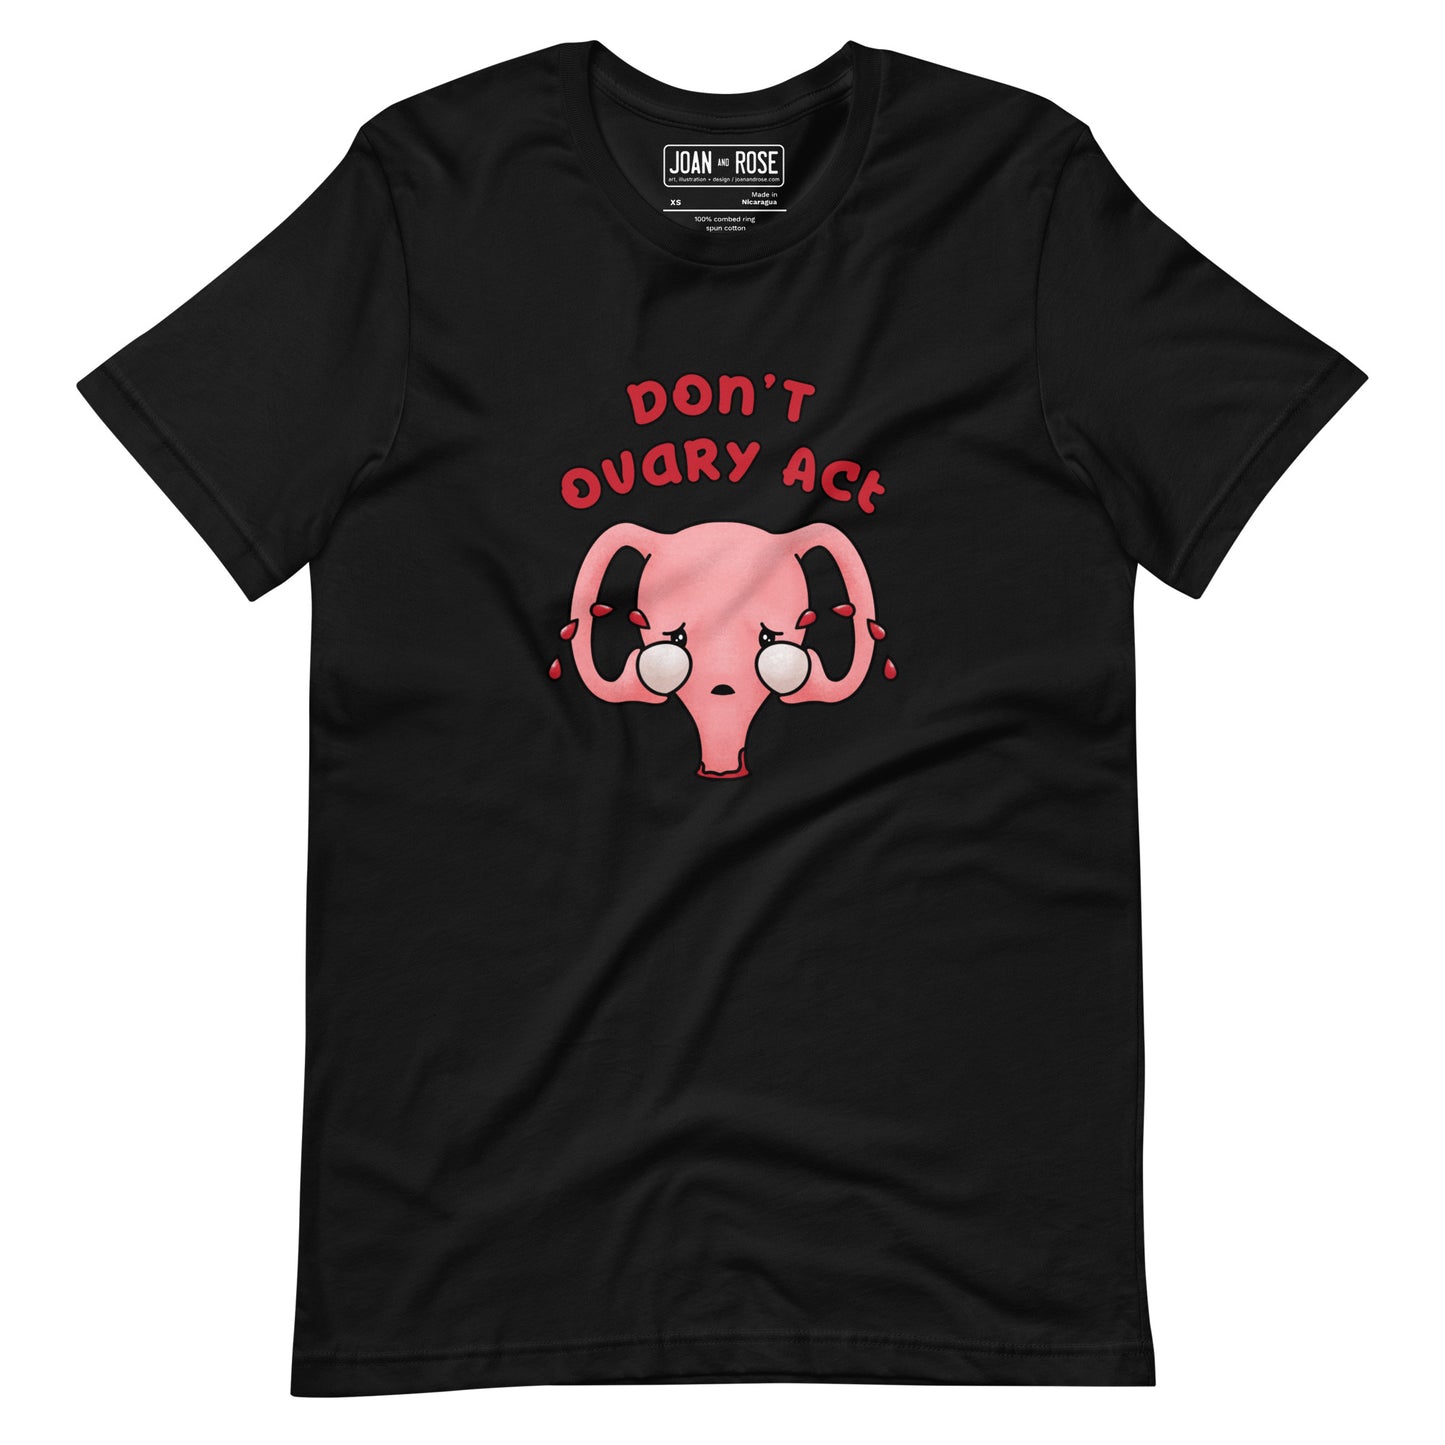 Black version of Don't Ovary Act t-shirt